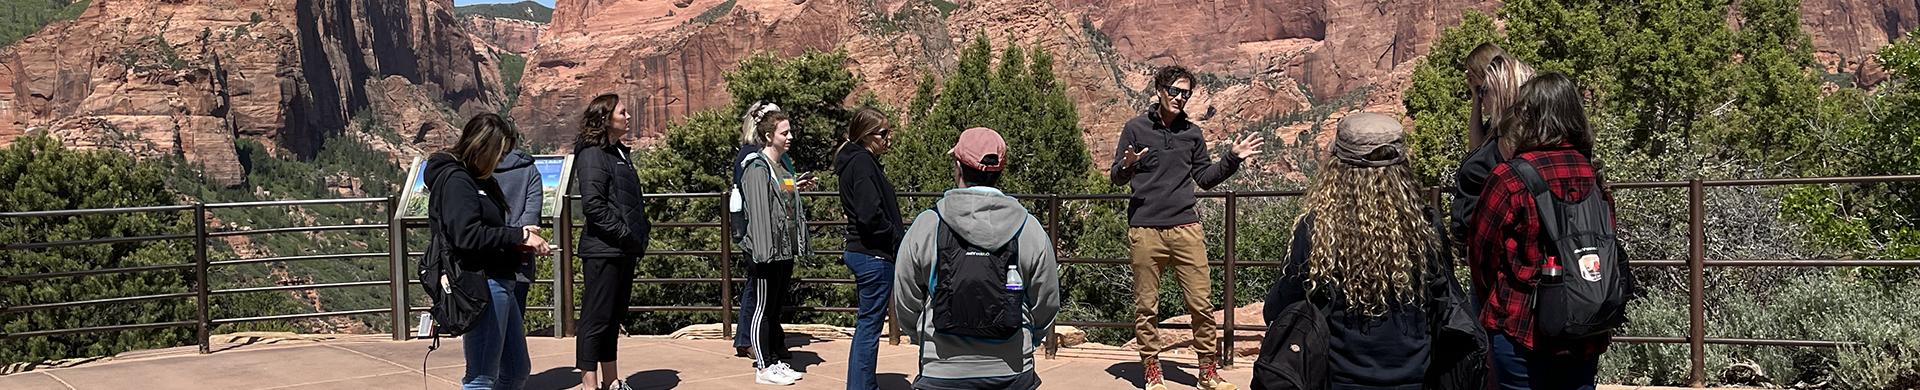 Tour Guide leading a group of participants in Zion National Park